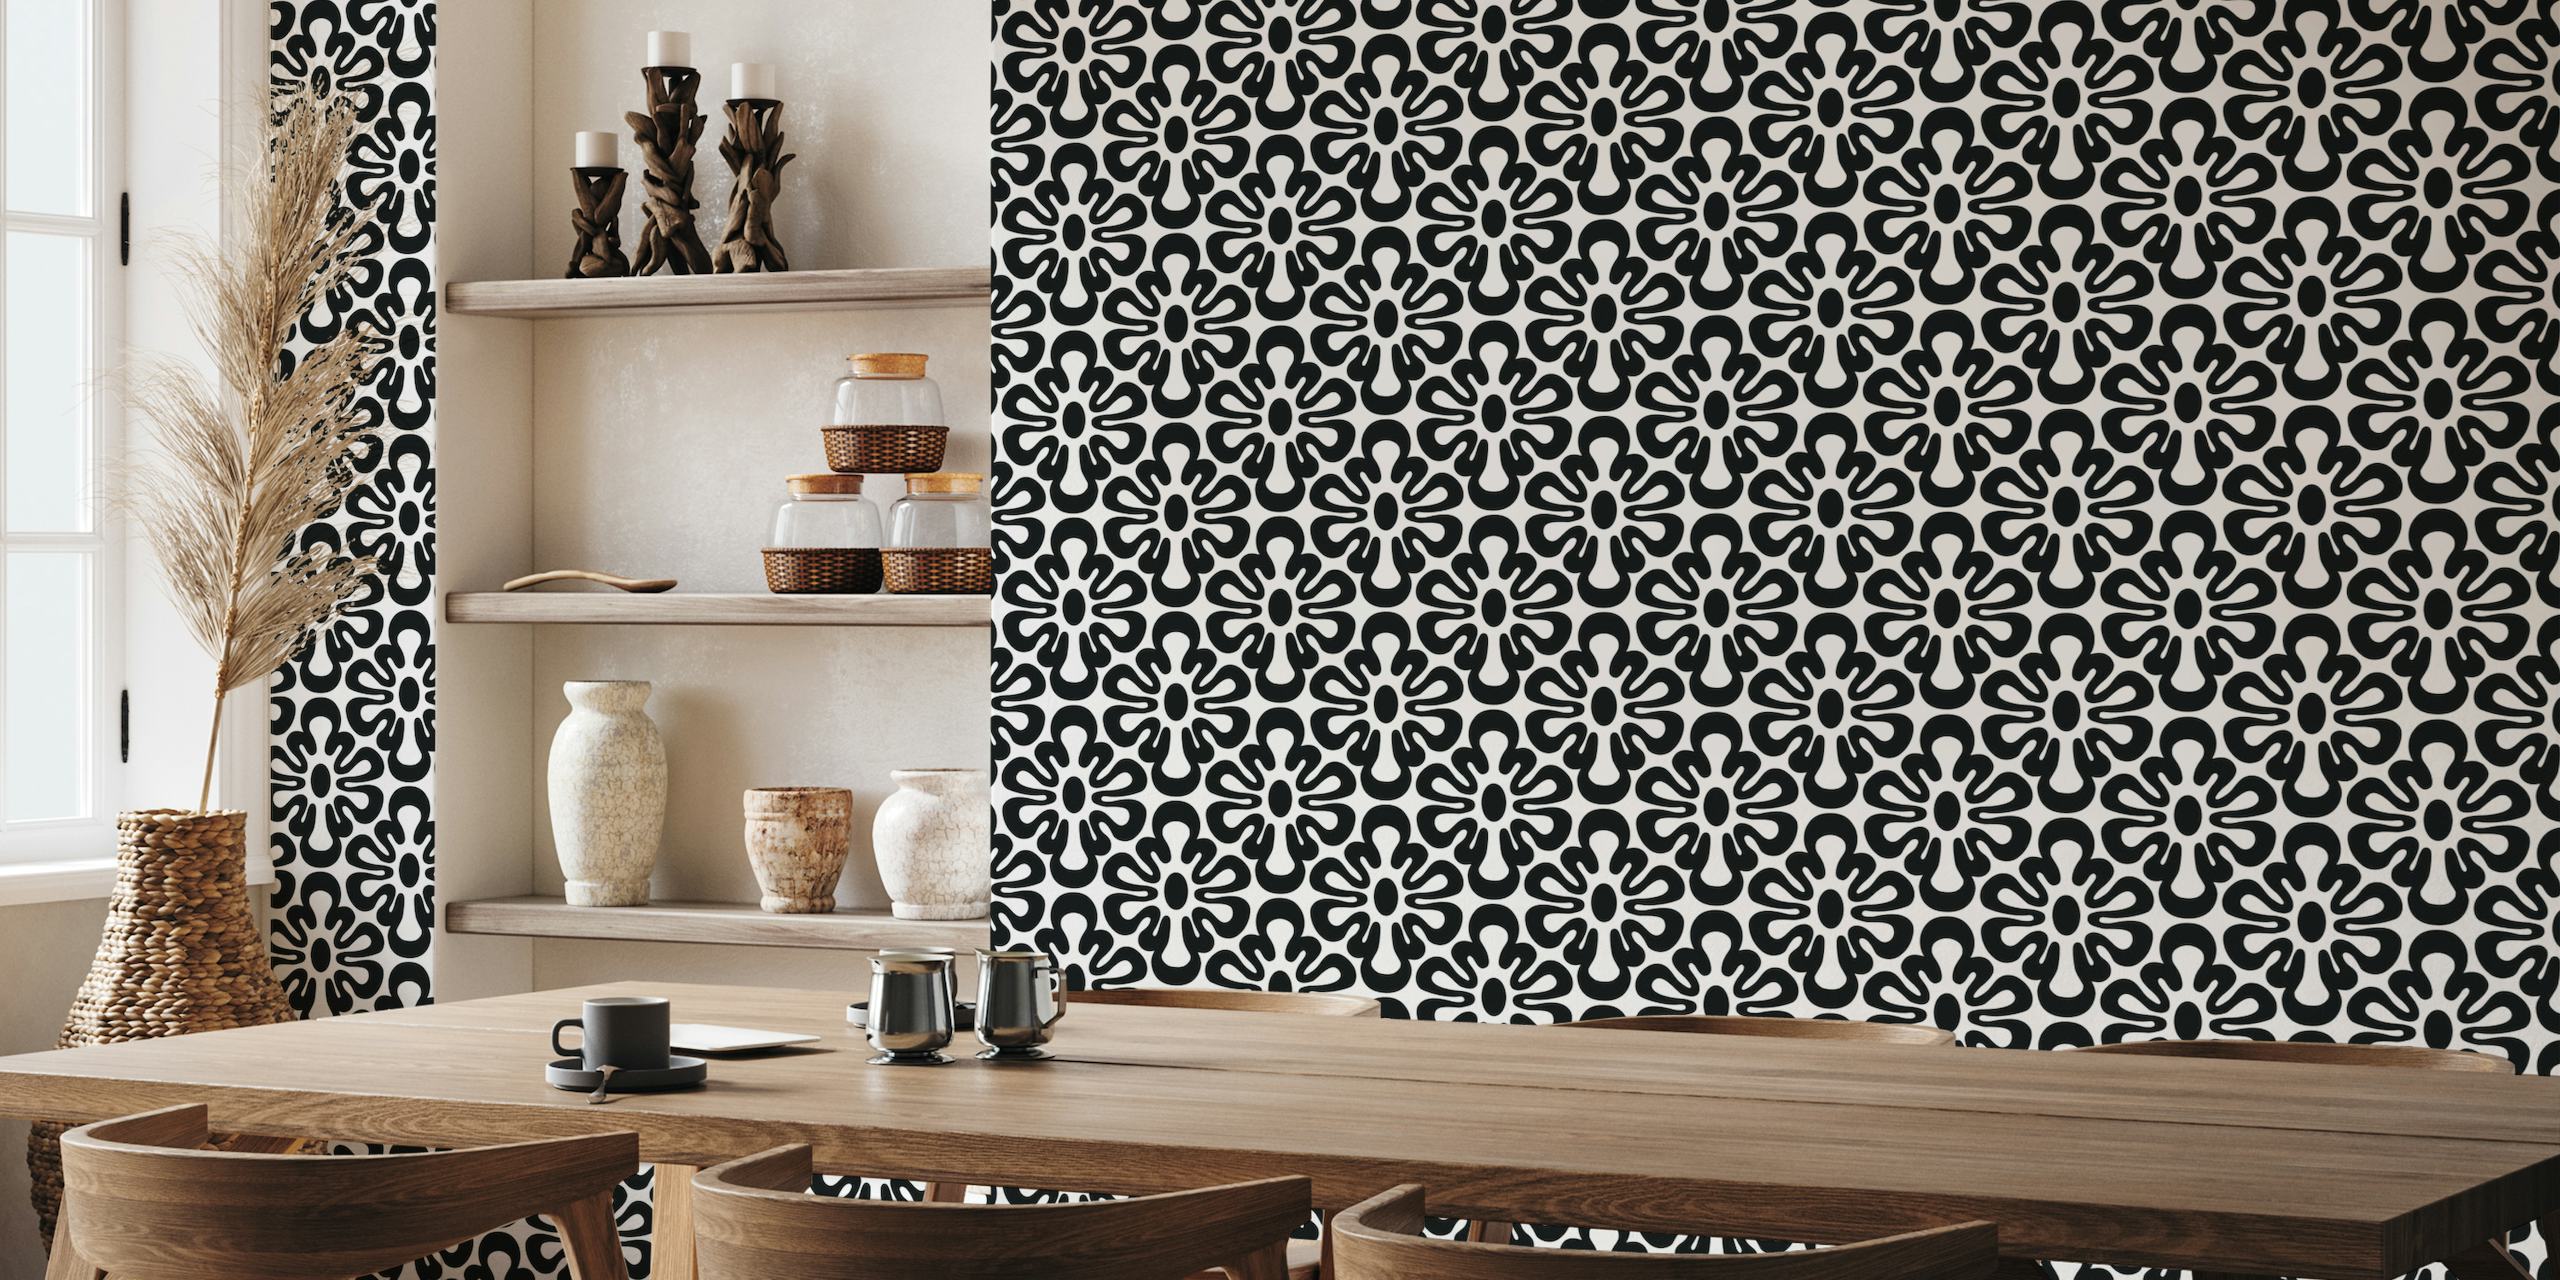 2625 D - abstract shapes pattern, black and white ταπετσαρία